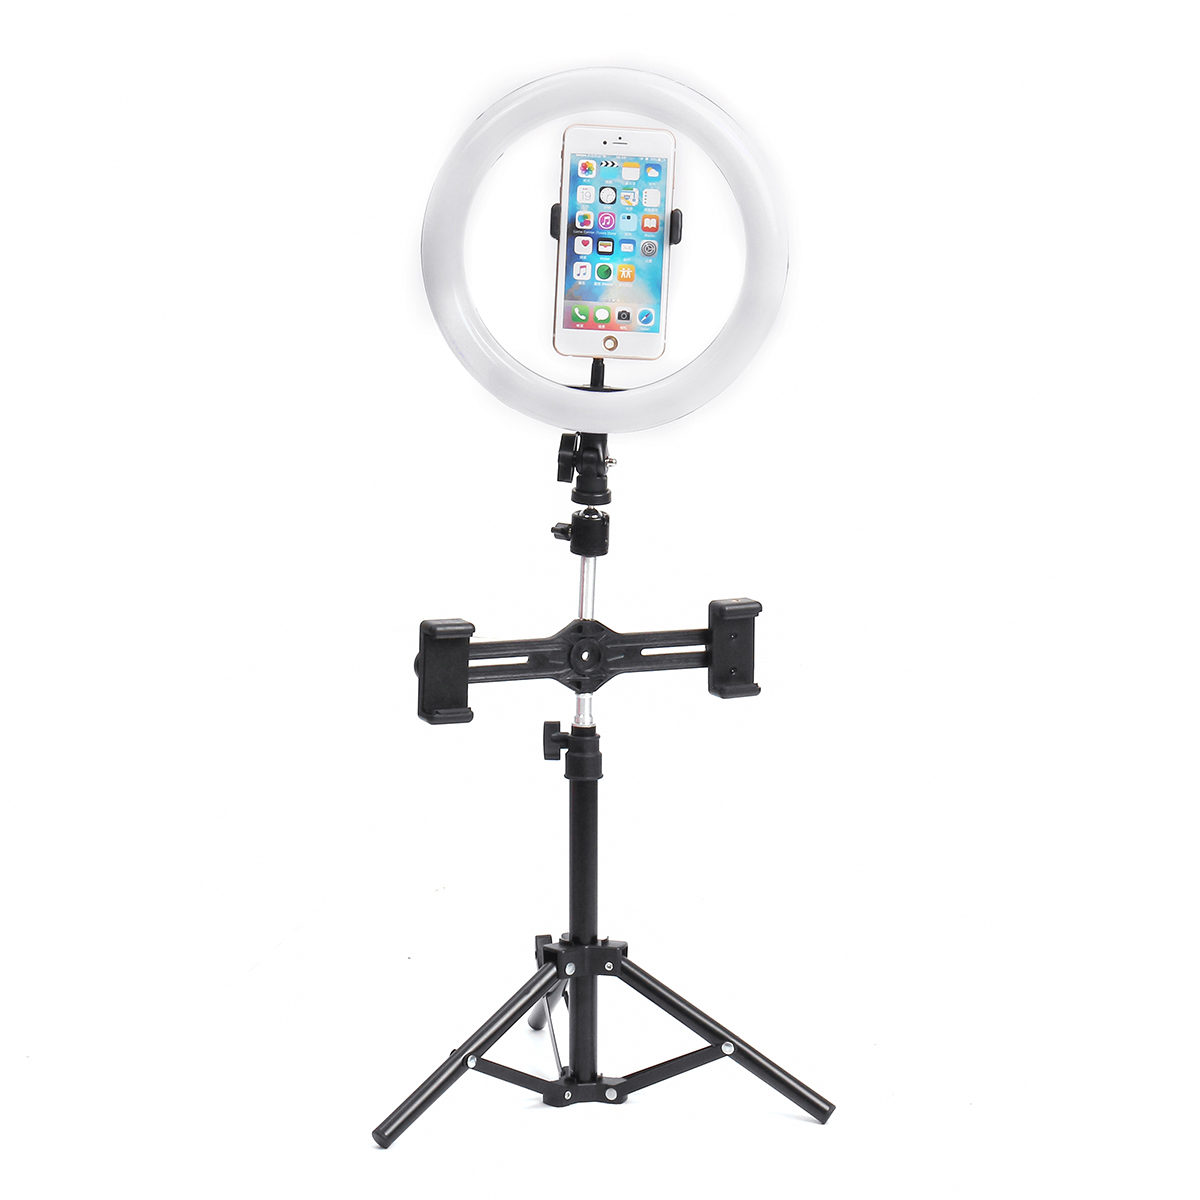 8-Inch-Video-Photography-Live-Streaming-Ring-Light-with-50cm-Light-Stand-3-Phone-Clip-1581006-1